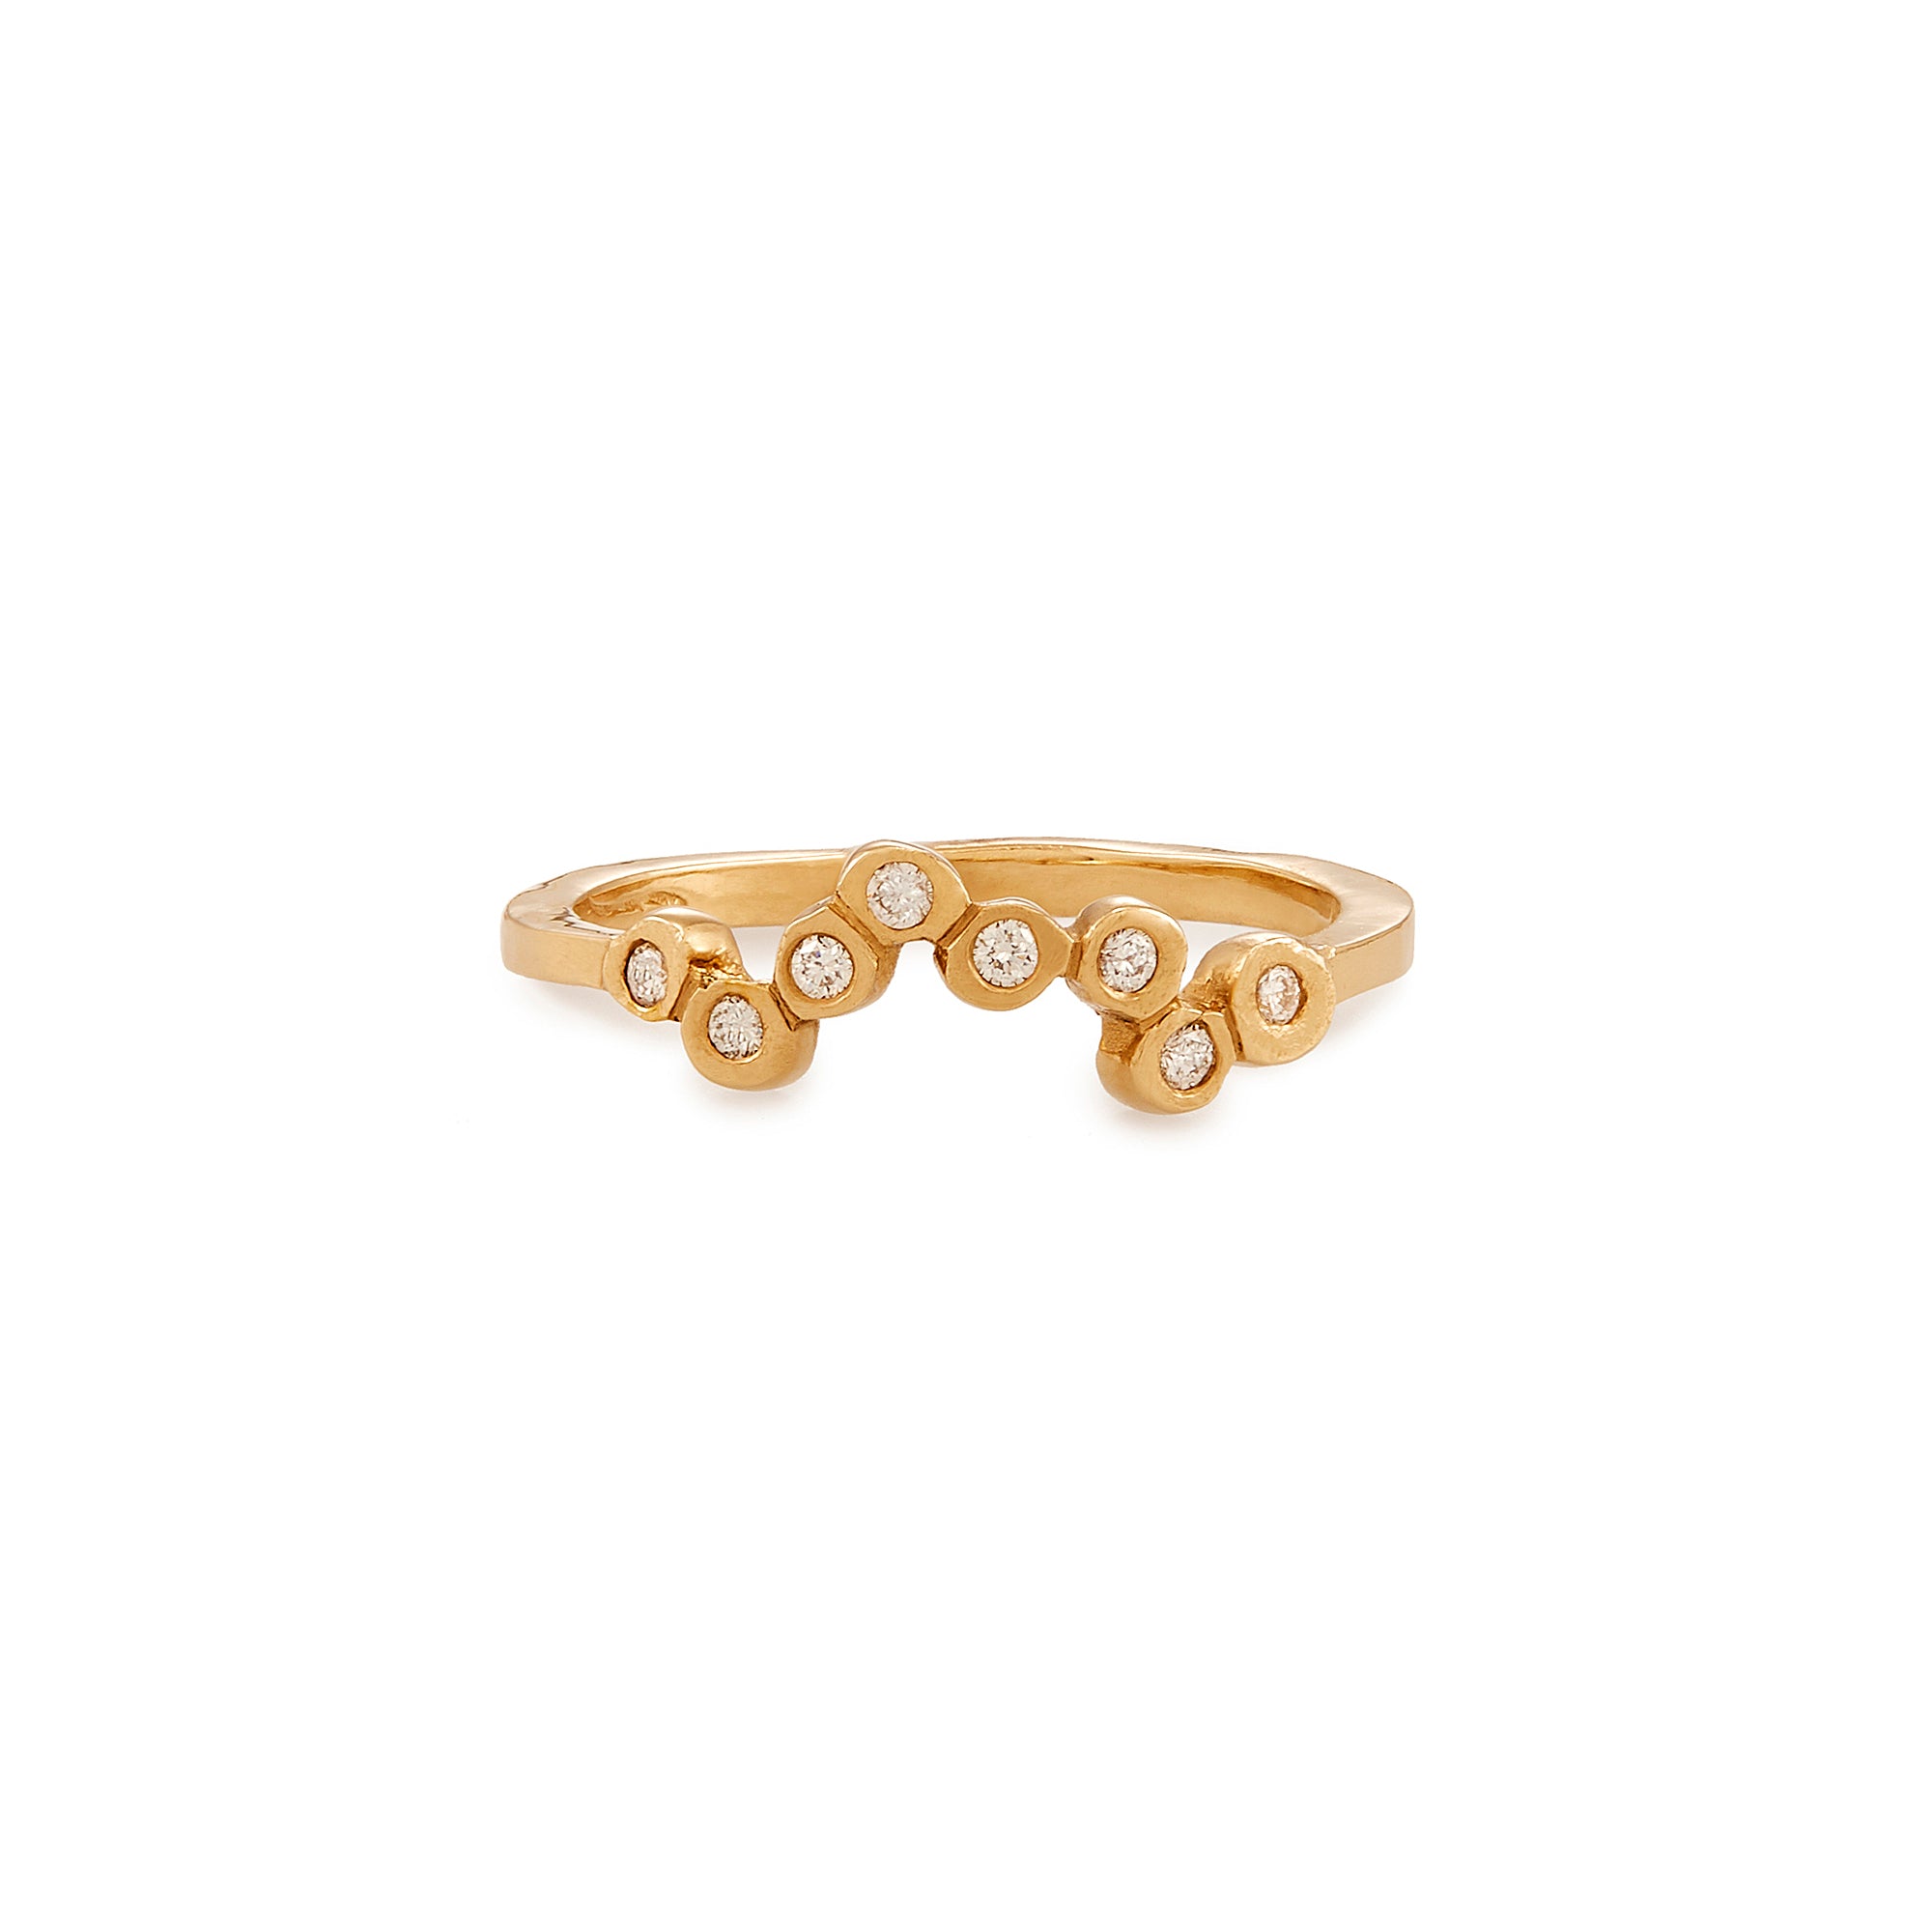  This unique Wave Contour Band makes a great complement to an engagement ring or as an addition to a stack.